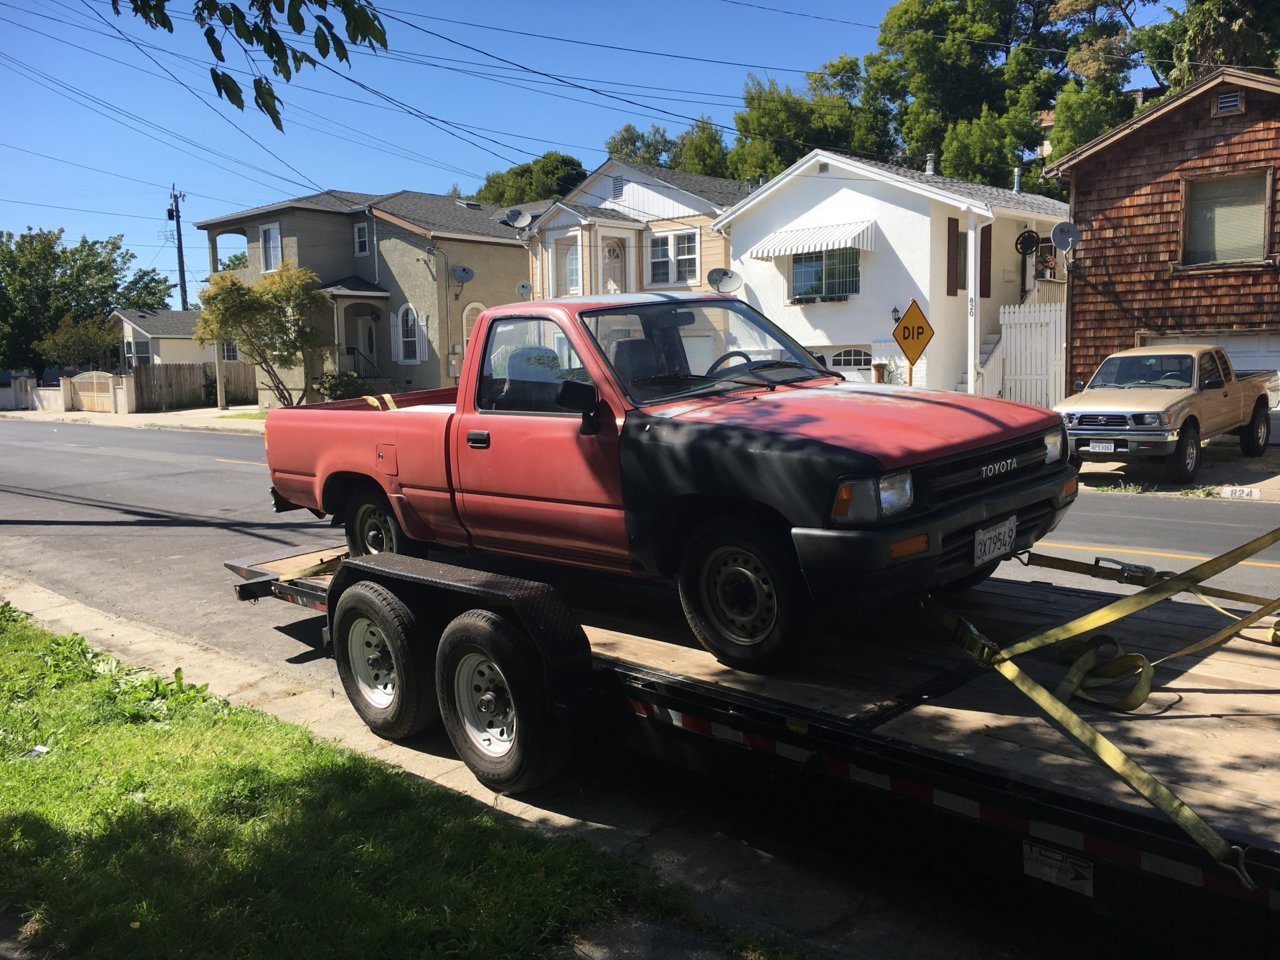 NorCal Craigslist finds | Page 782 | Tacoma World